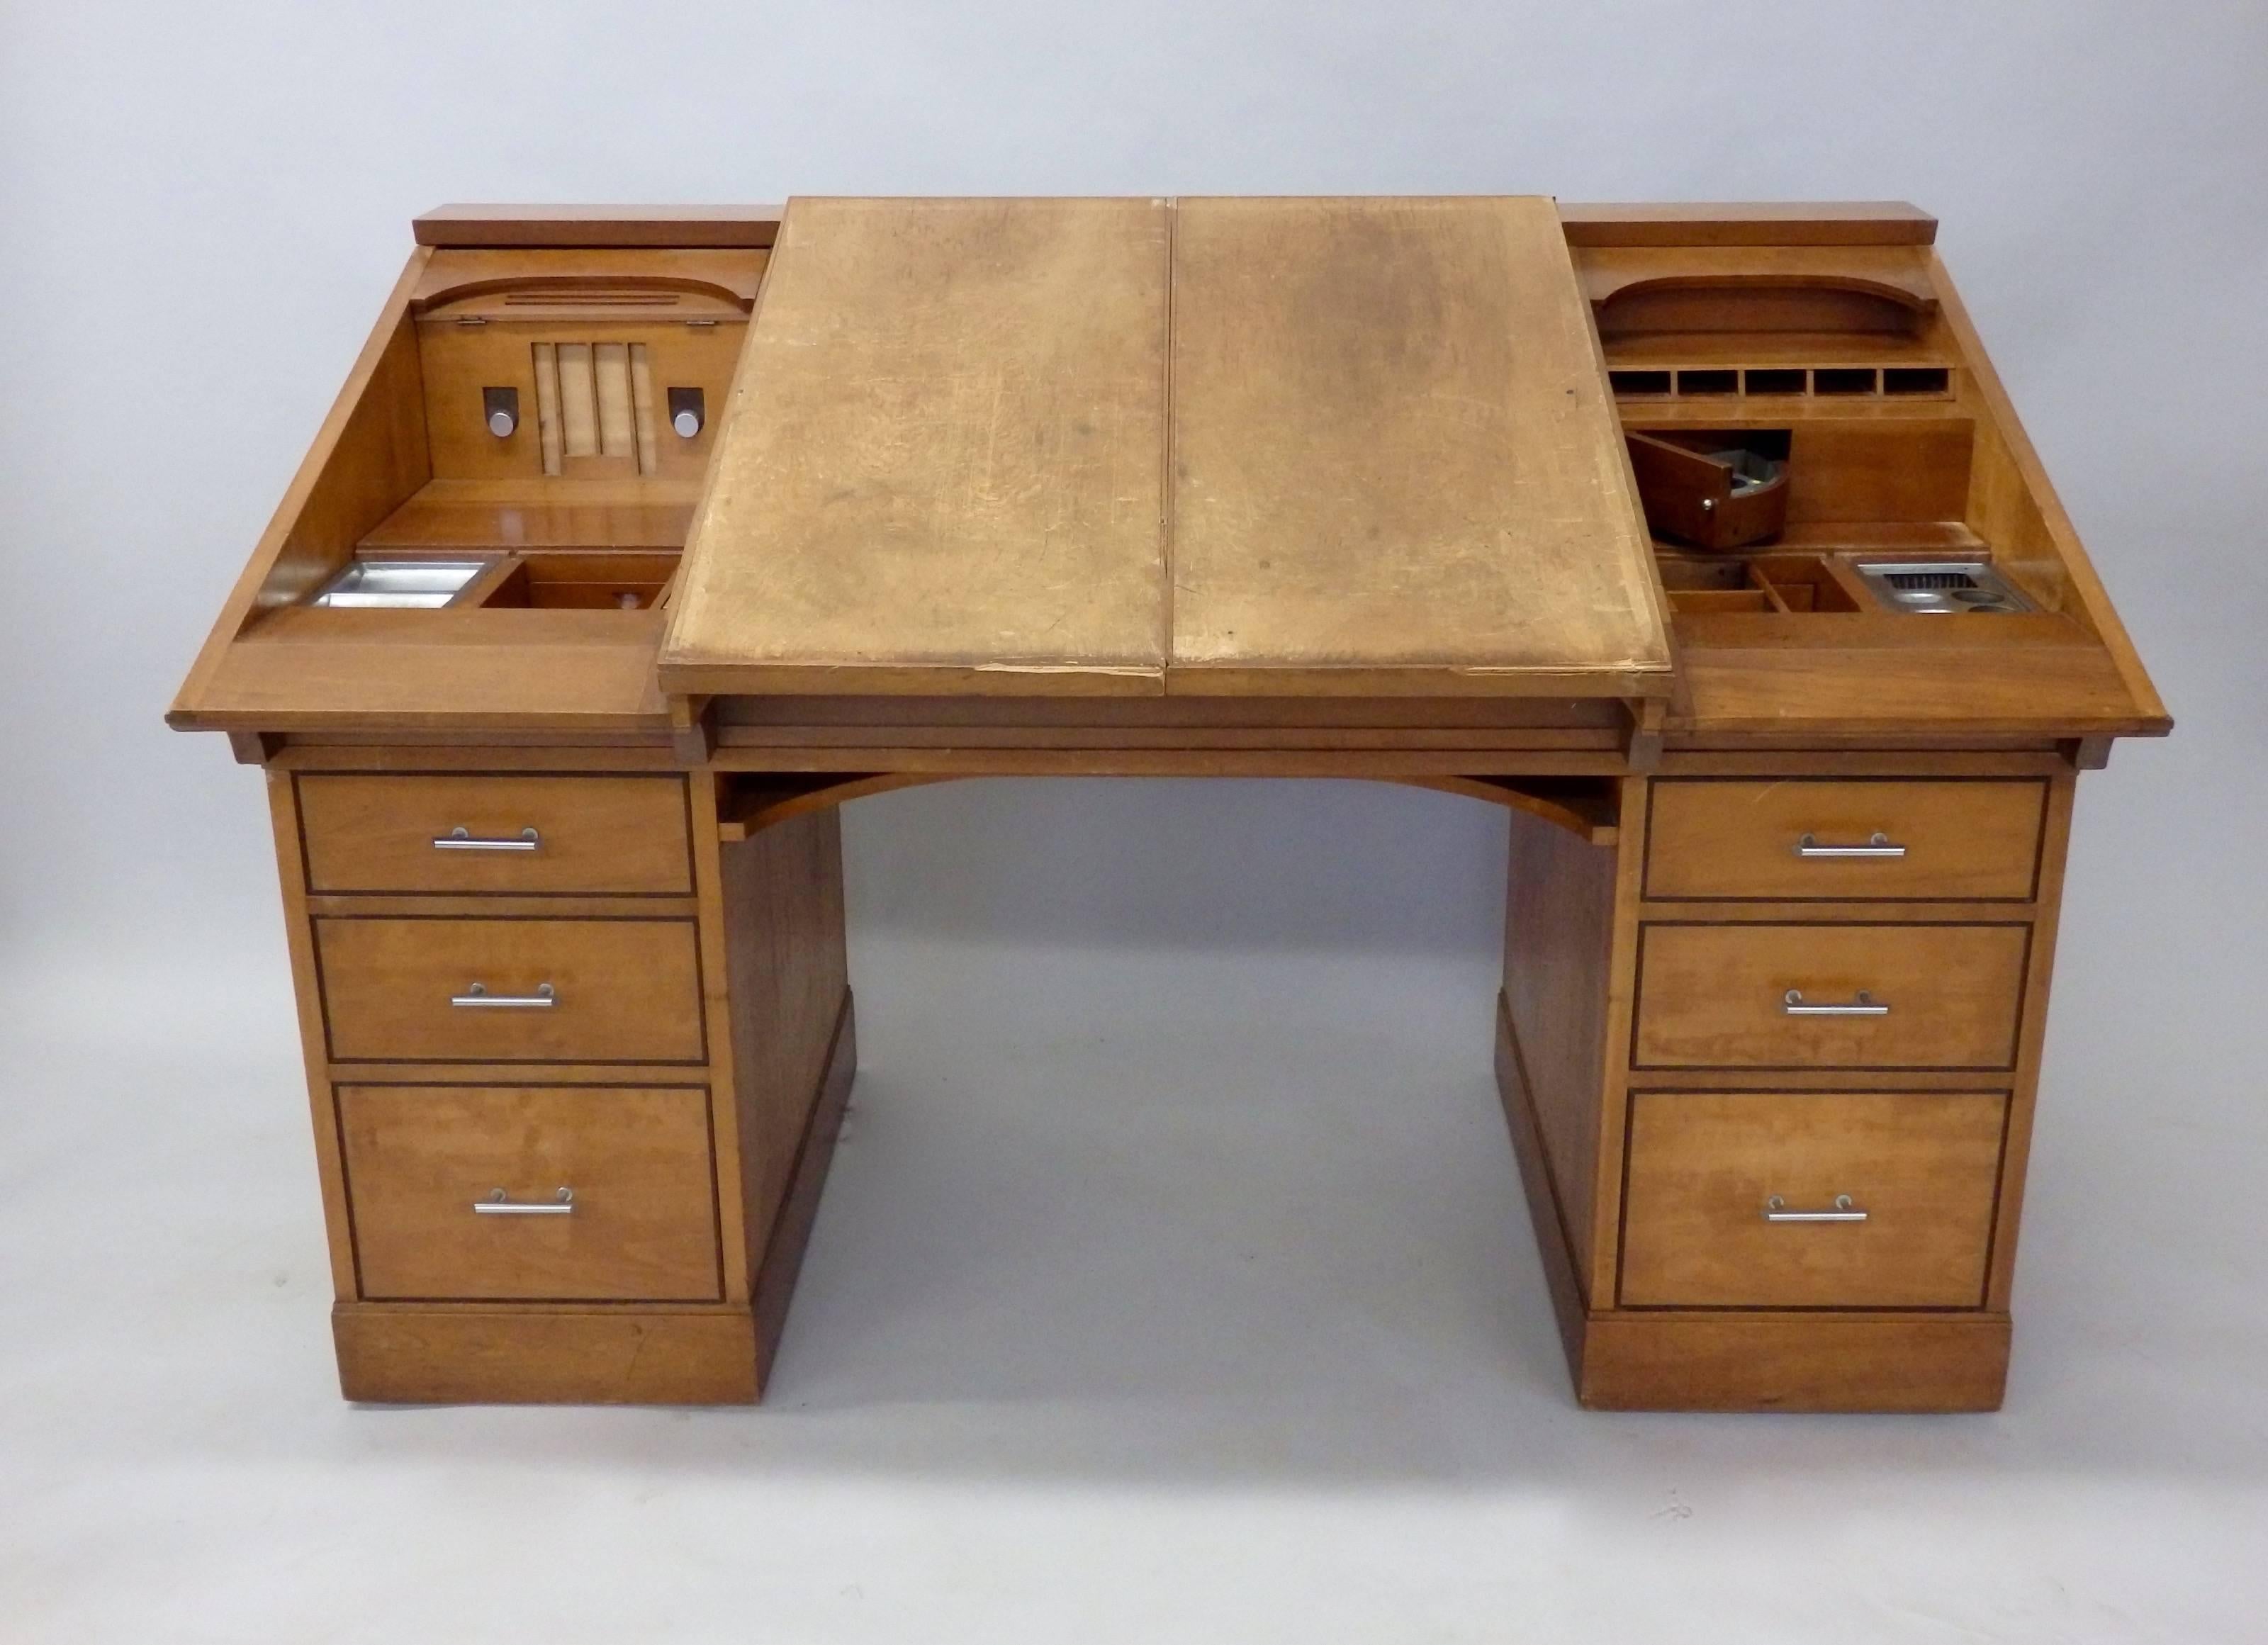 Custom Built Art Deco desk attributed to Johann Tapp of Chicago . Built for Chicago Tribune Pulitzer prize winning cartoonist Carey Orr. Both top side panels flip inward to create drafting workspace. Sliding doors reveal multiple compartments